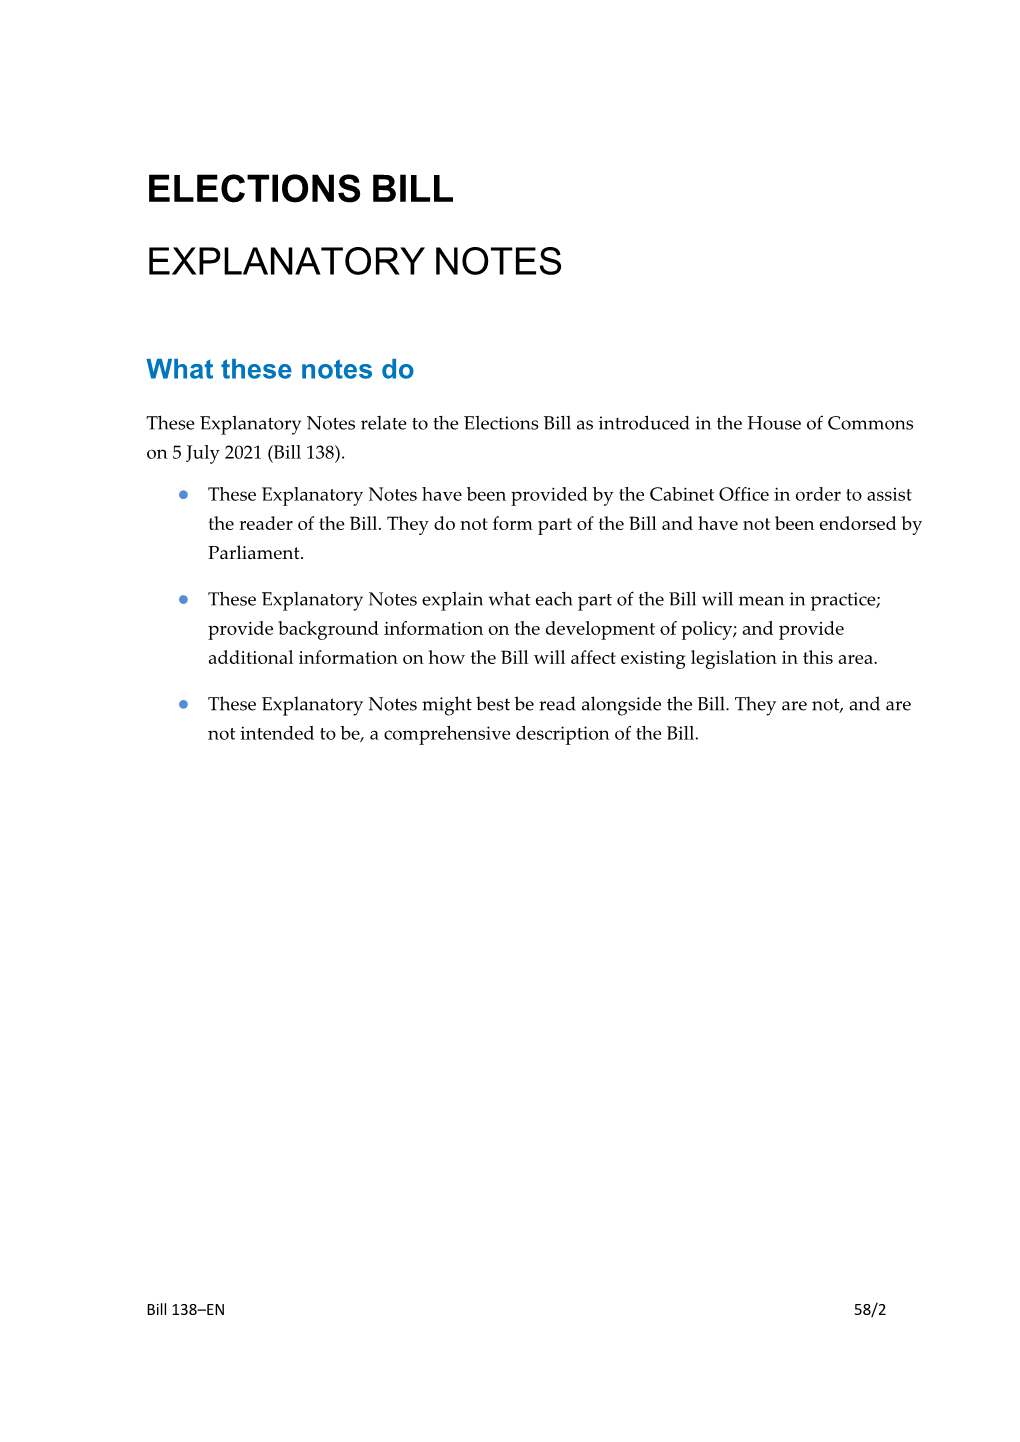 Elections Bill Explanatory Notes